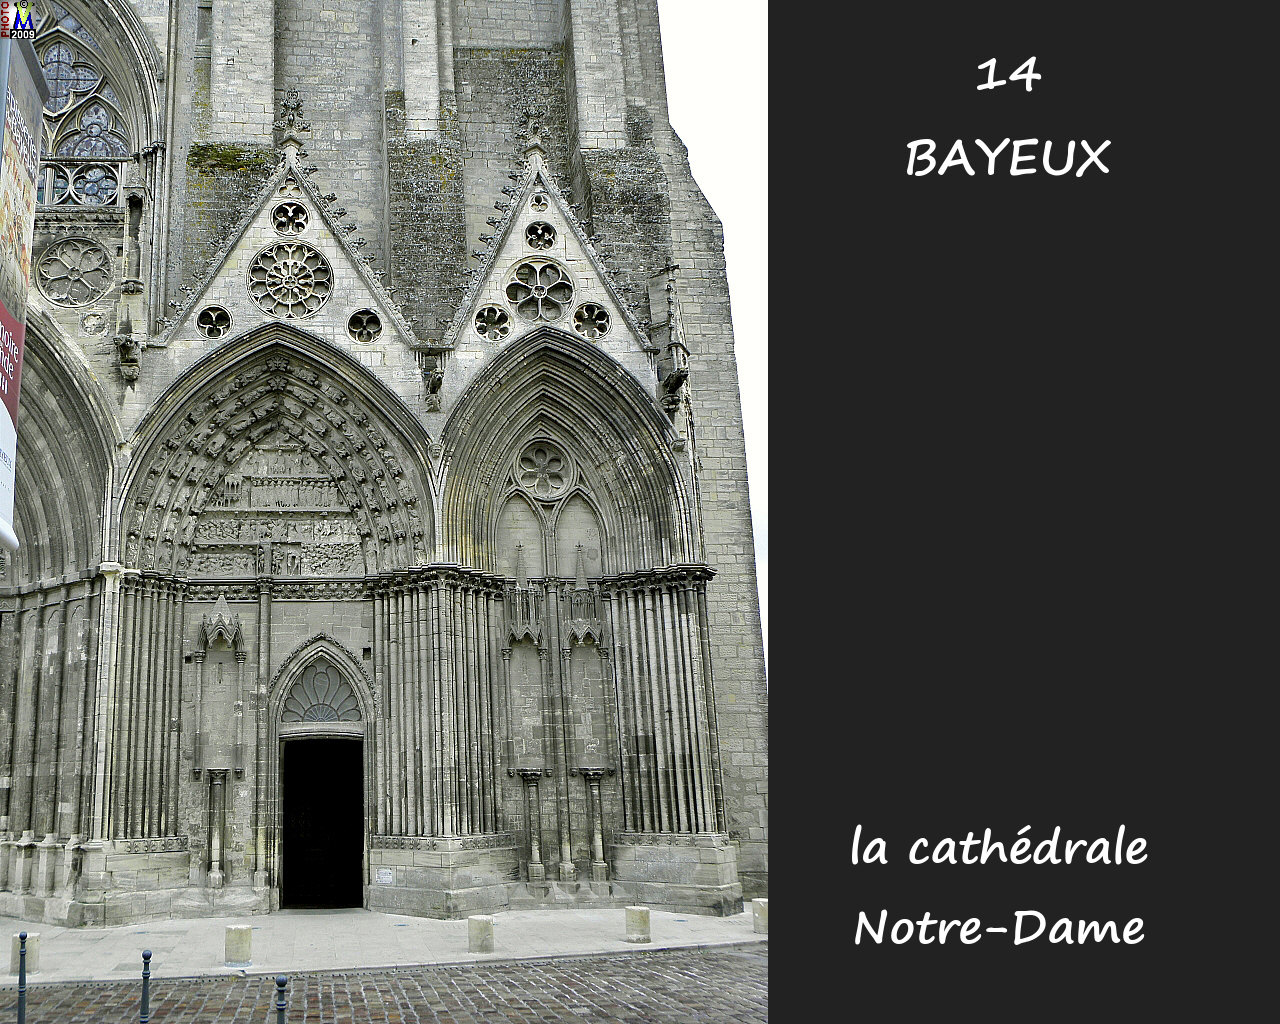 14BAYEUX_cathedrale_142.jpg